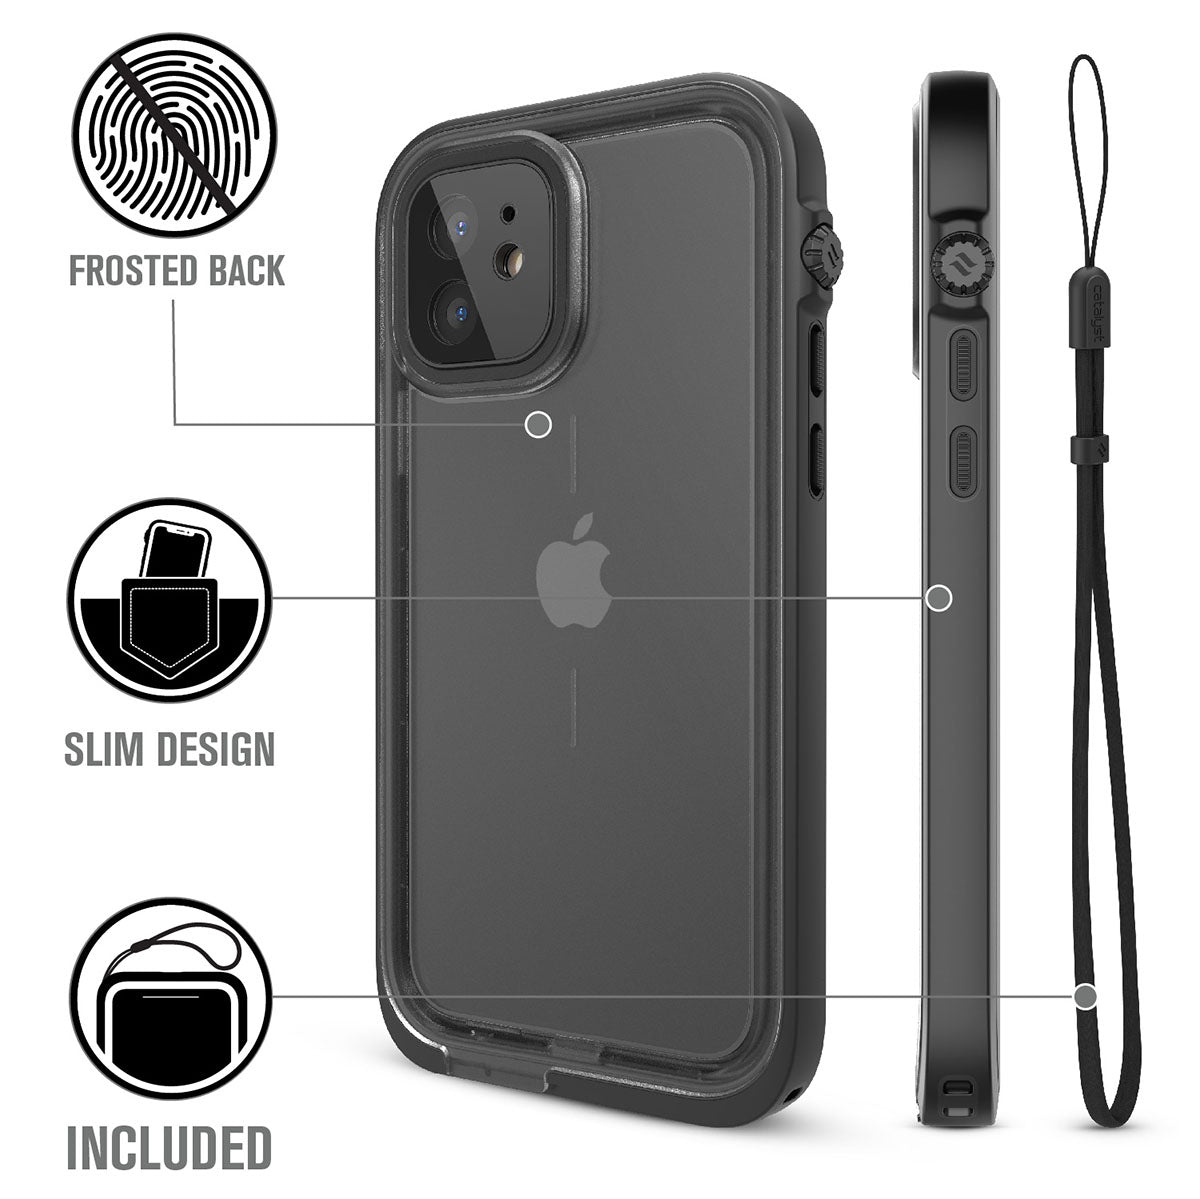 Catalyst iPhone 12 waterproof case total protection drop proof water proof front back case with lanyard Text readsfrosted back slim design